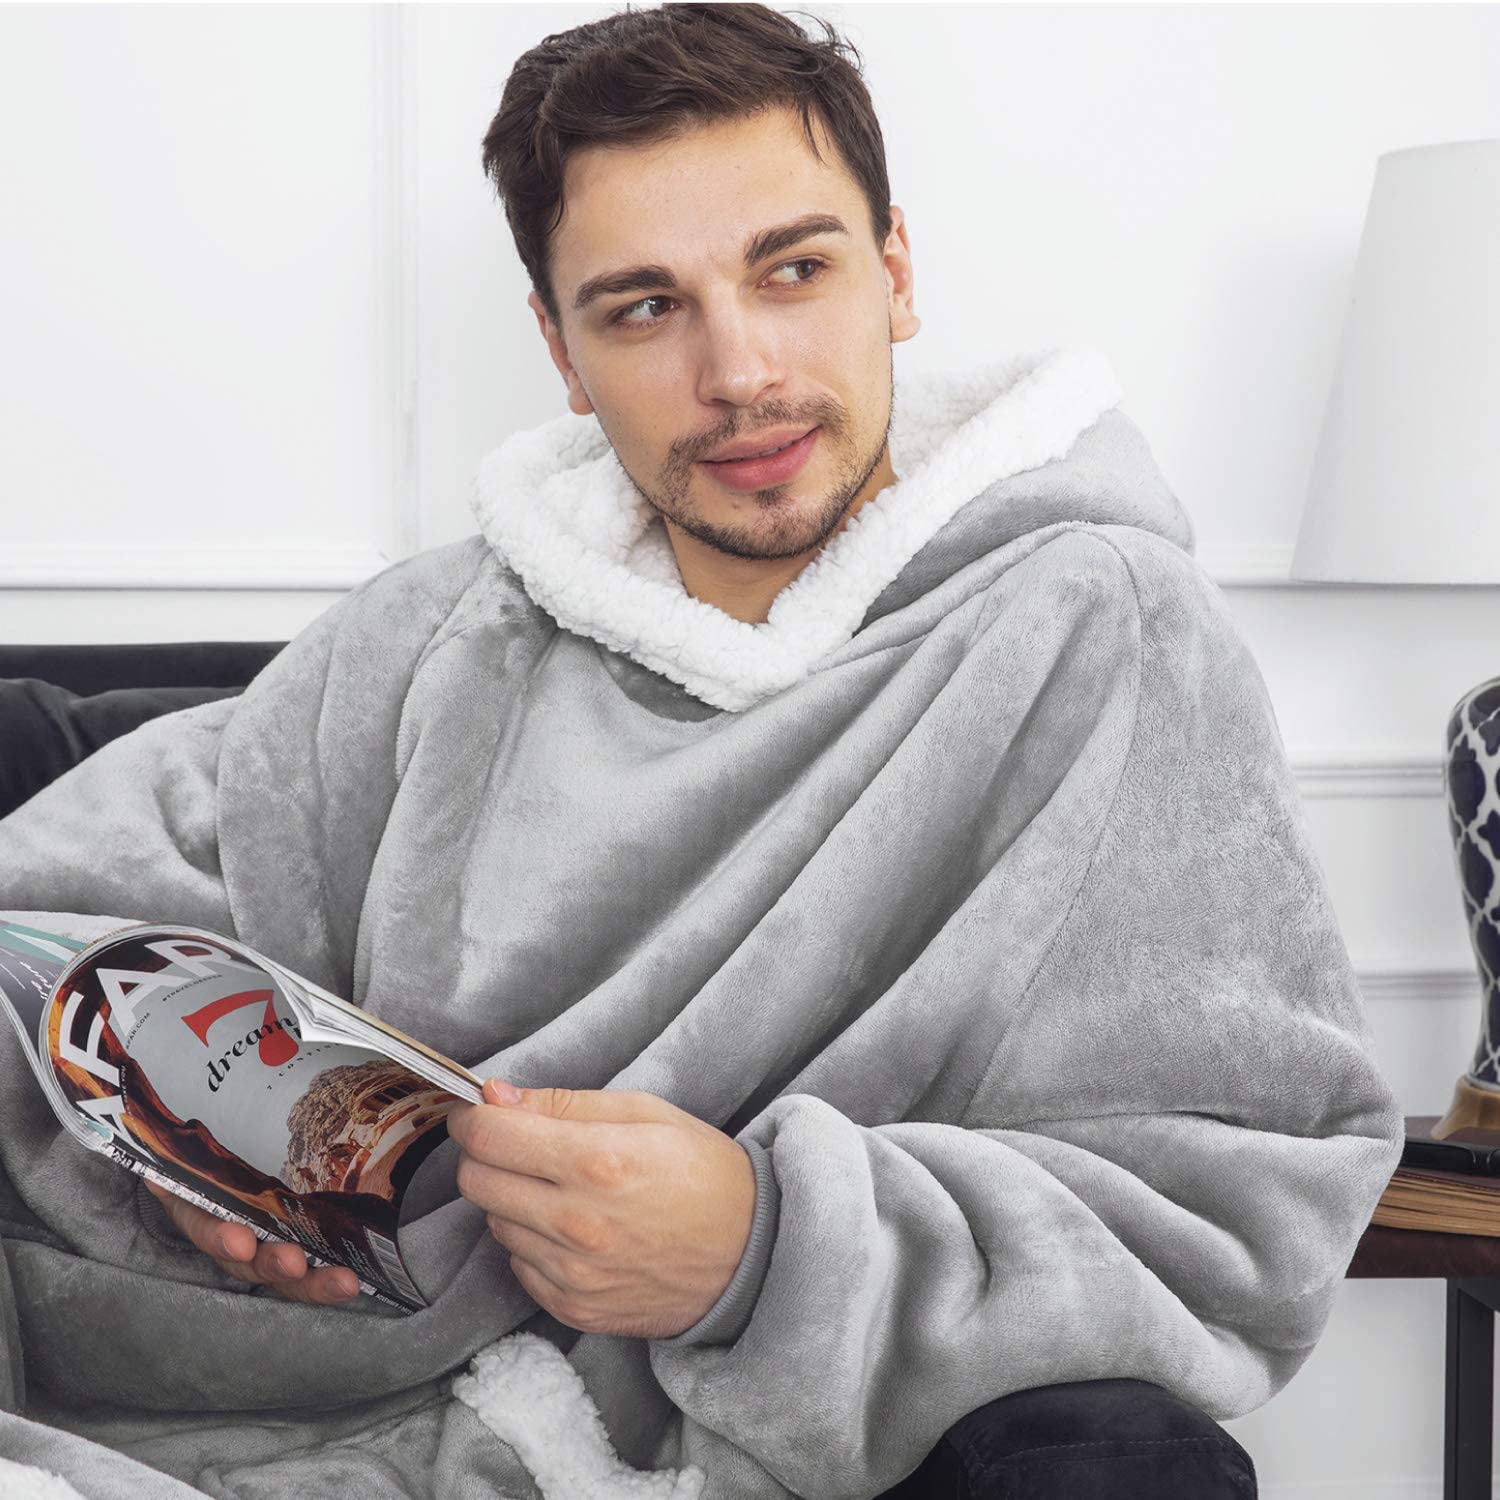 Level-up your Work from Home Office with these Cozy, Comfortable Products